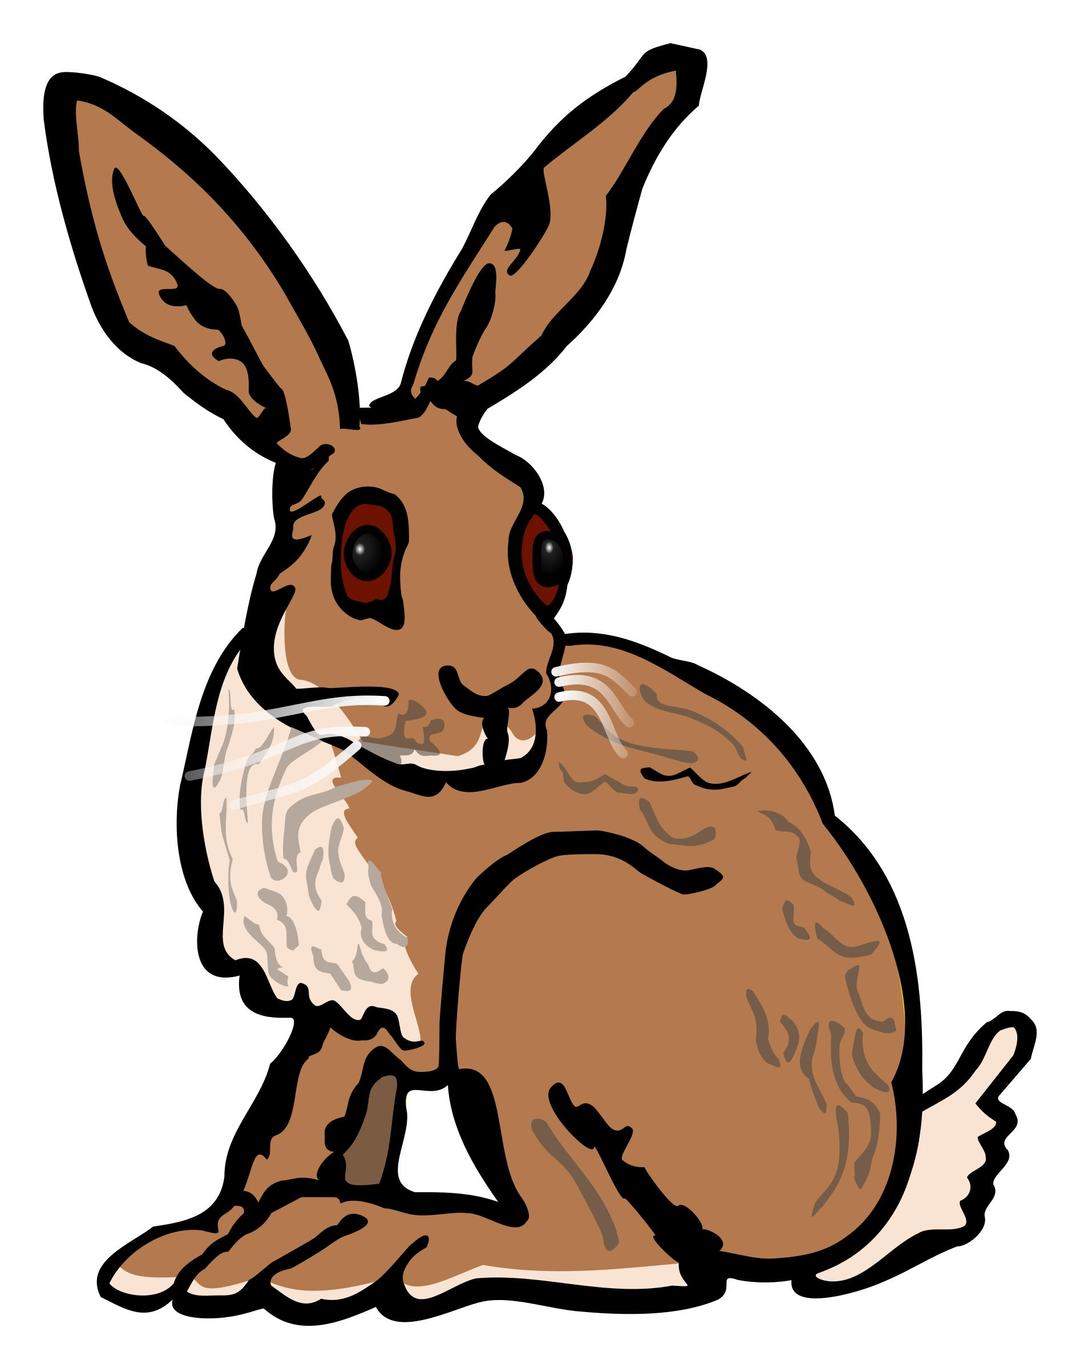 Hare - coloured png transparent